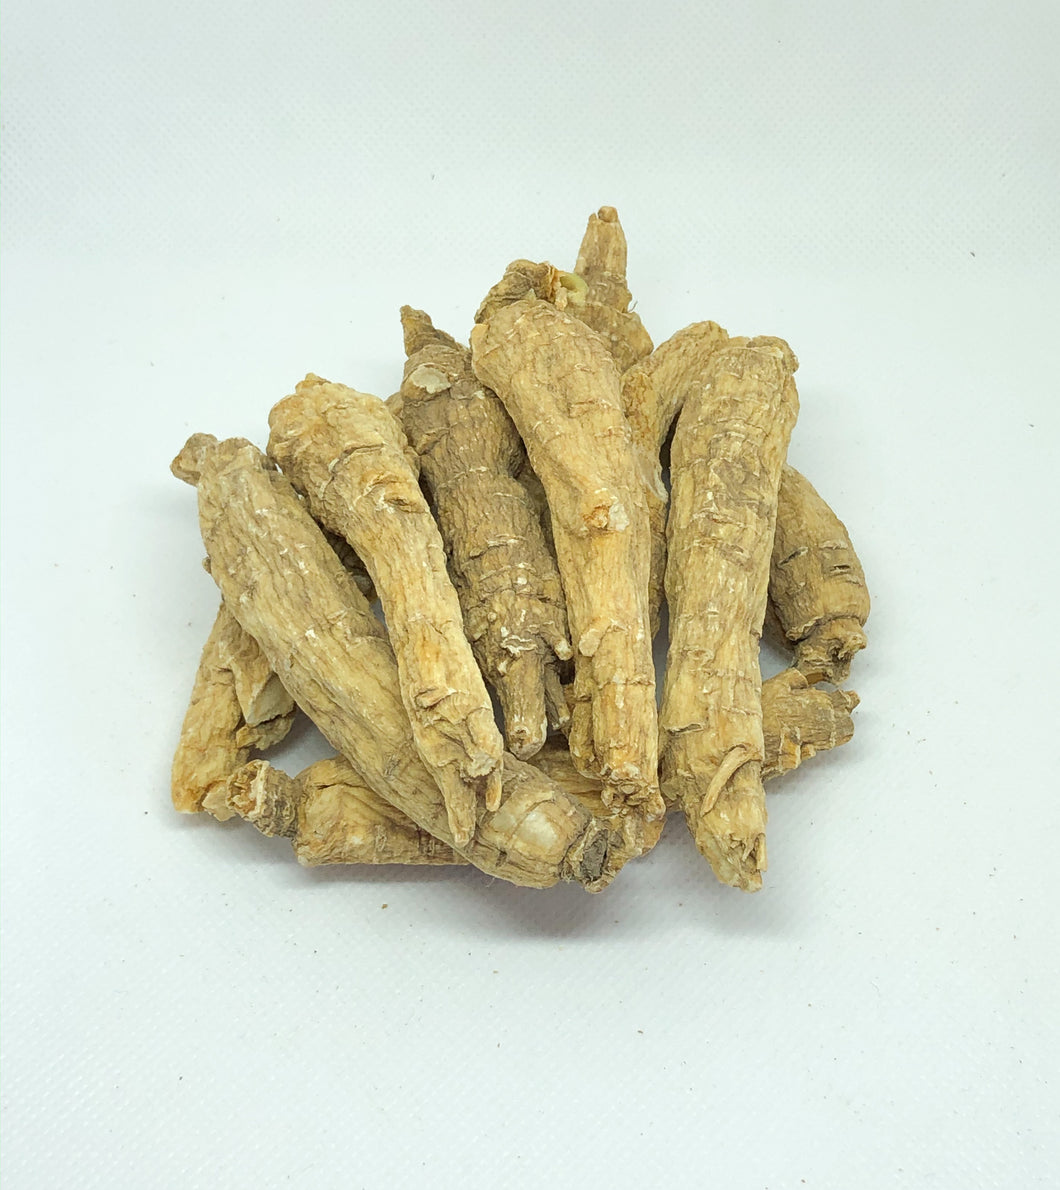 Graded Medium Long Large Wisconsin Grown American Ginseng By The Pound